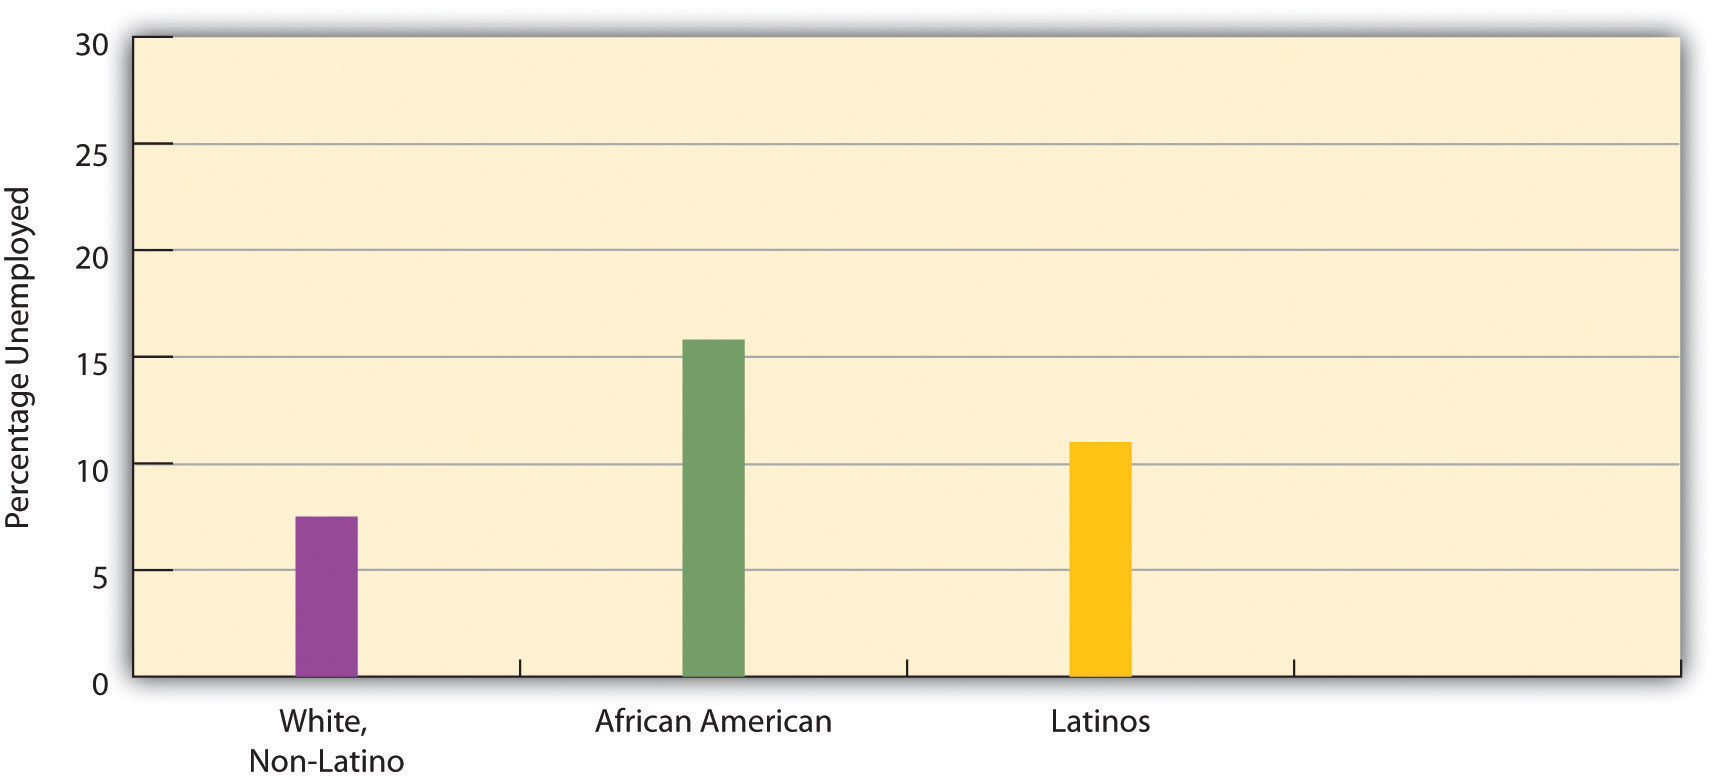 Race, Ethnicity, and Unemployment Rate, this shows that 16% of African Americans are unemployed, as well as 12% Latinos, and 8% of whites/non-latino